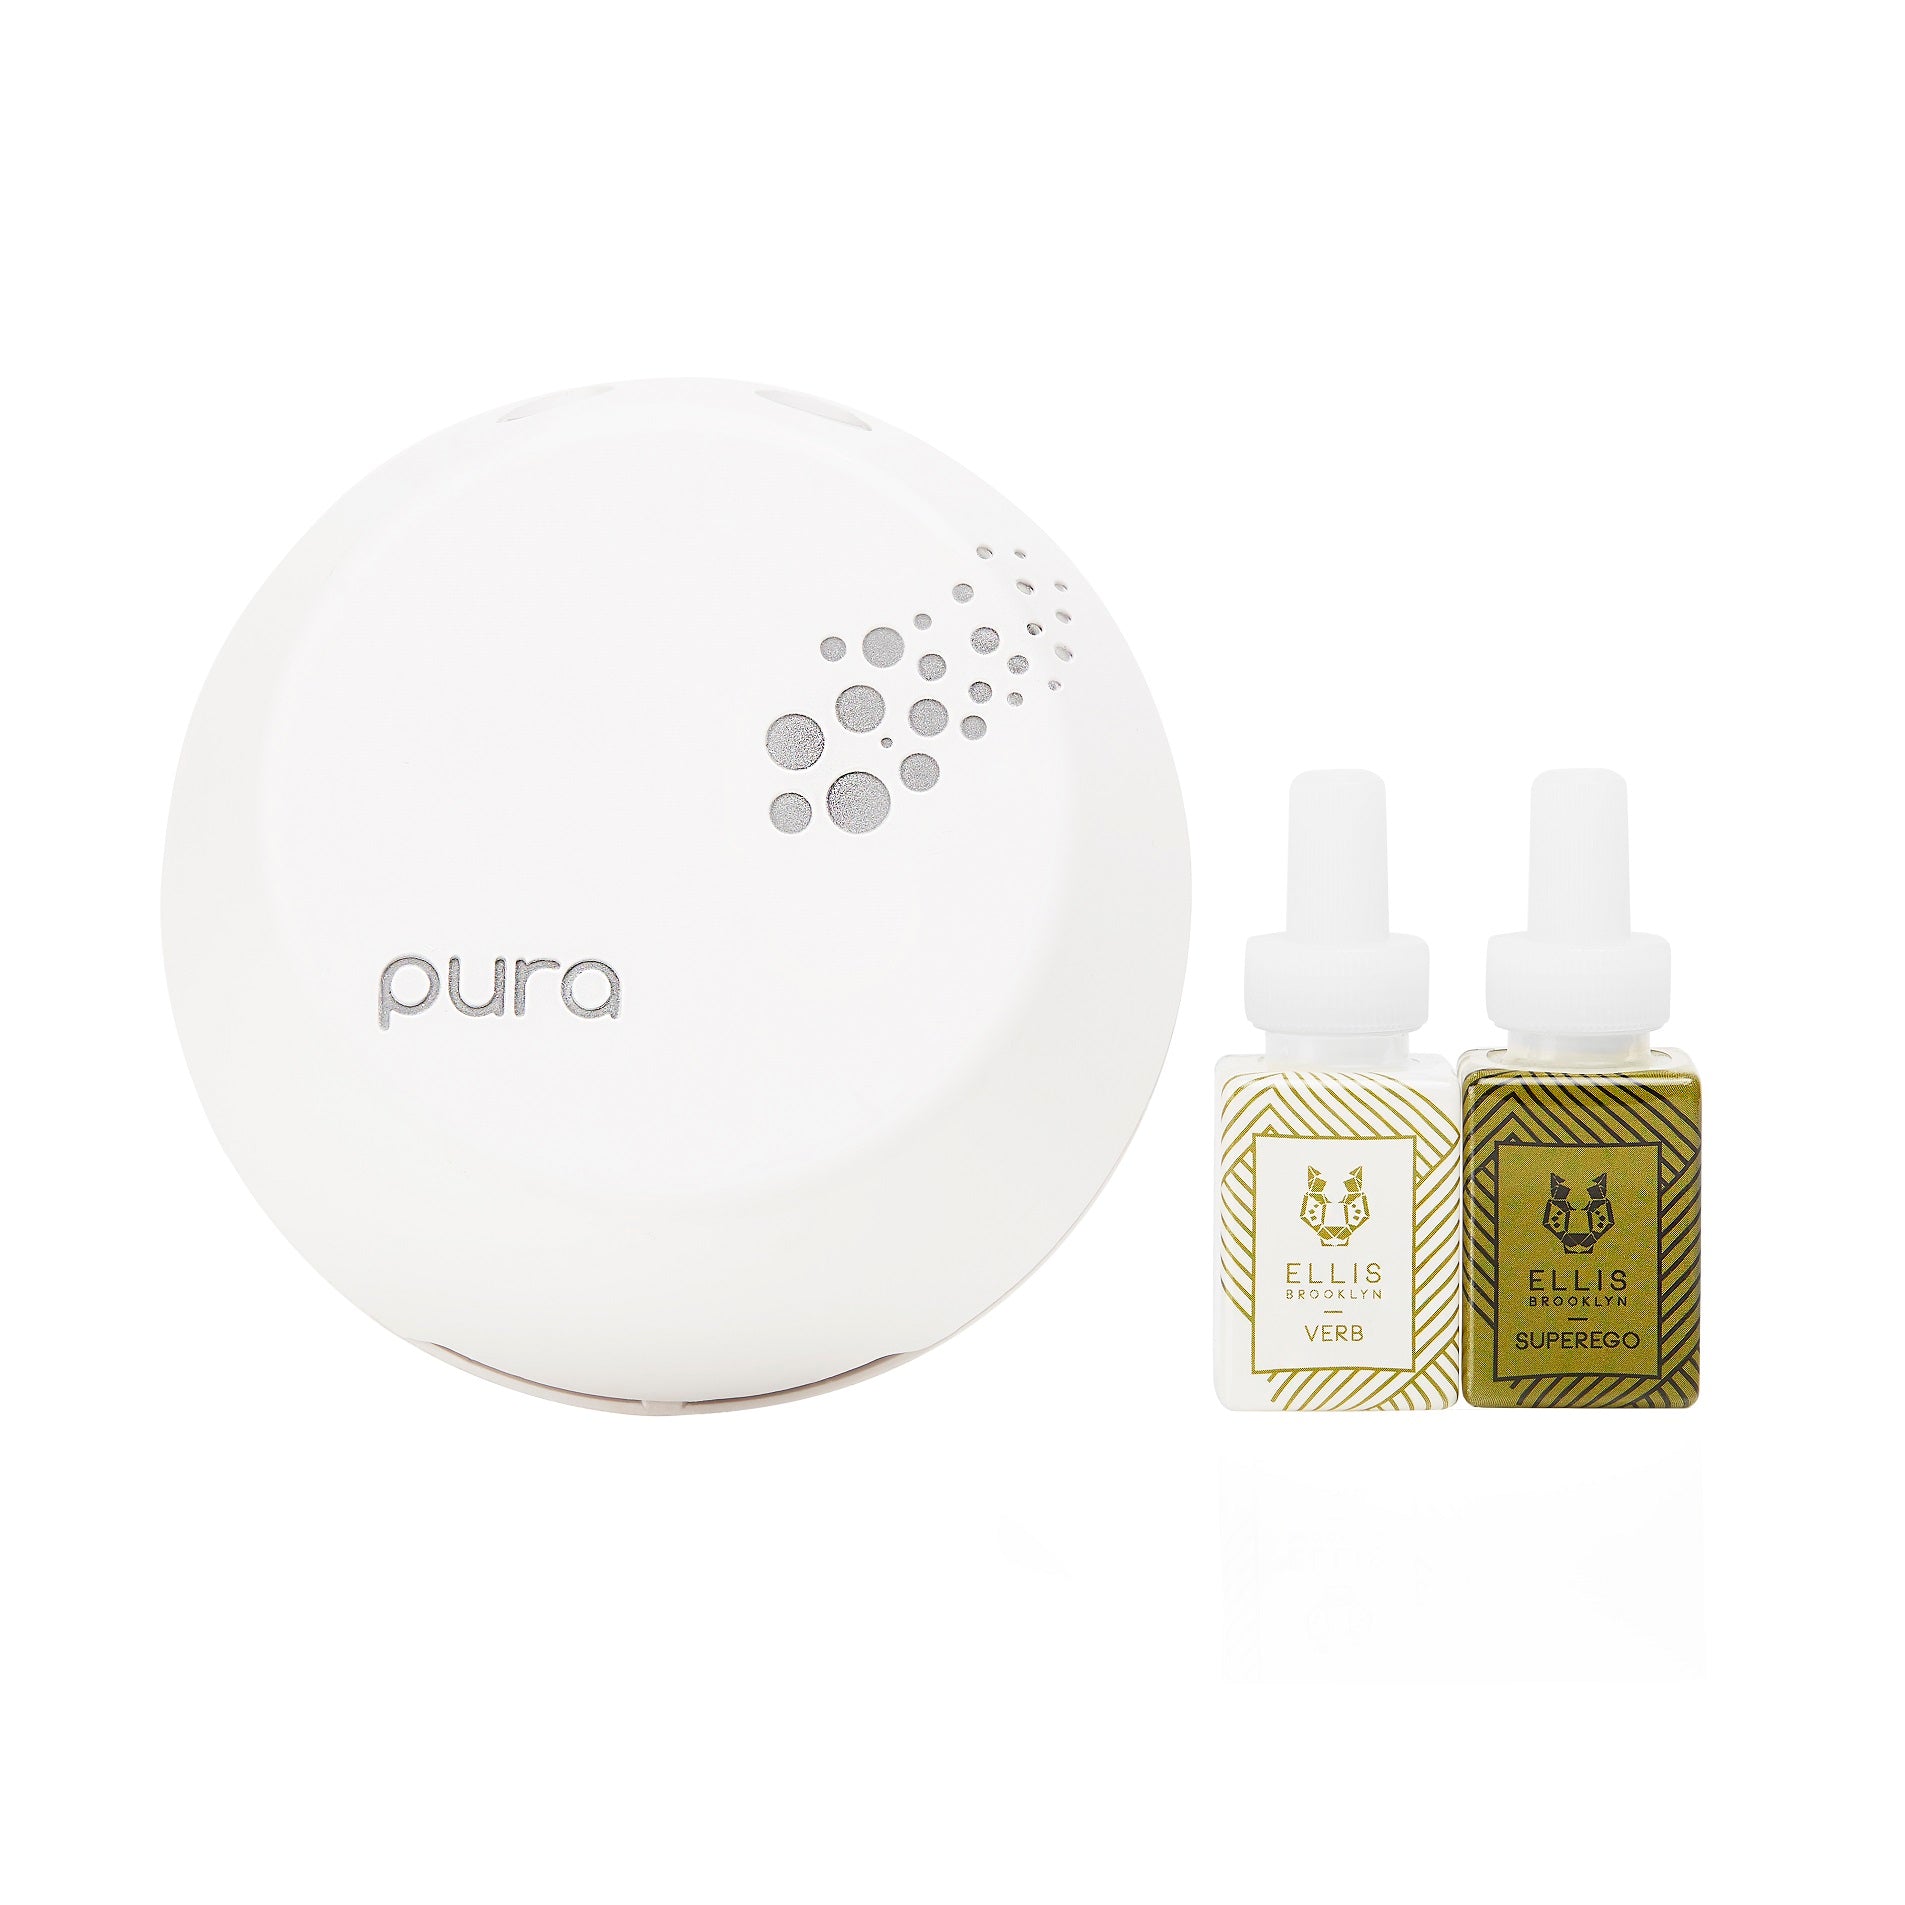 Pura Smart Home Fragrance Diffuser Kit featuring VERB and SUPEREGO